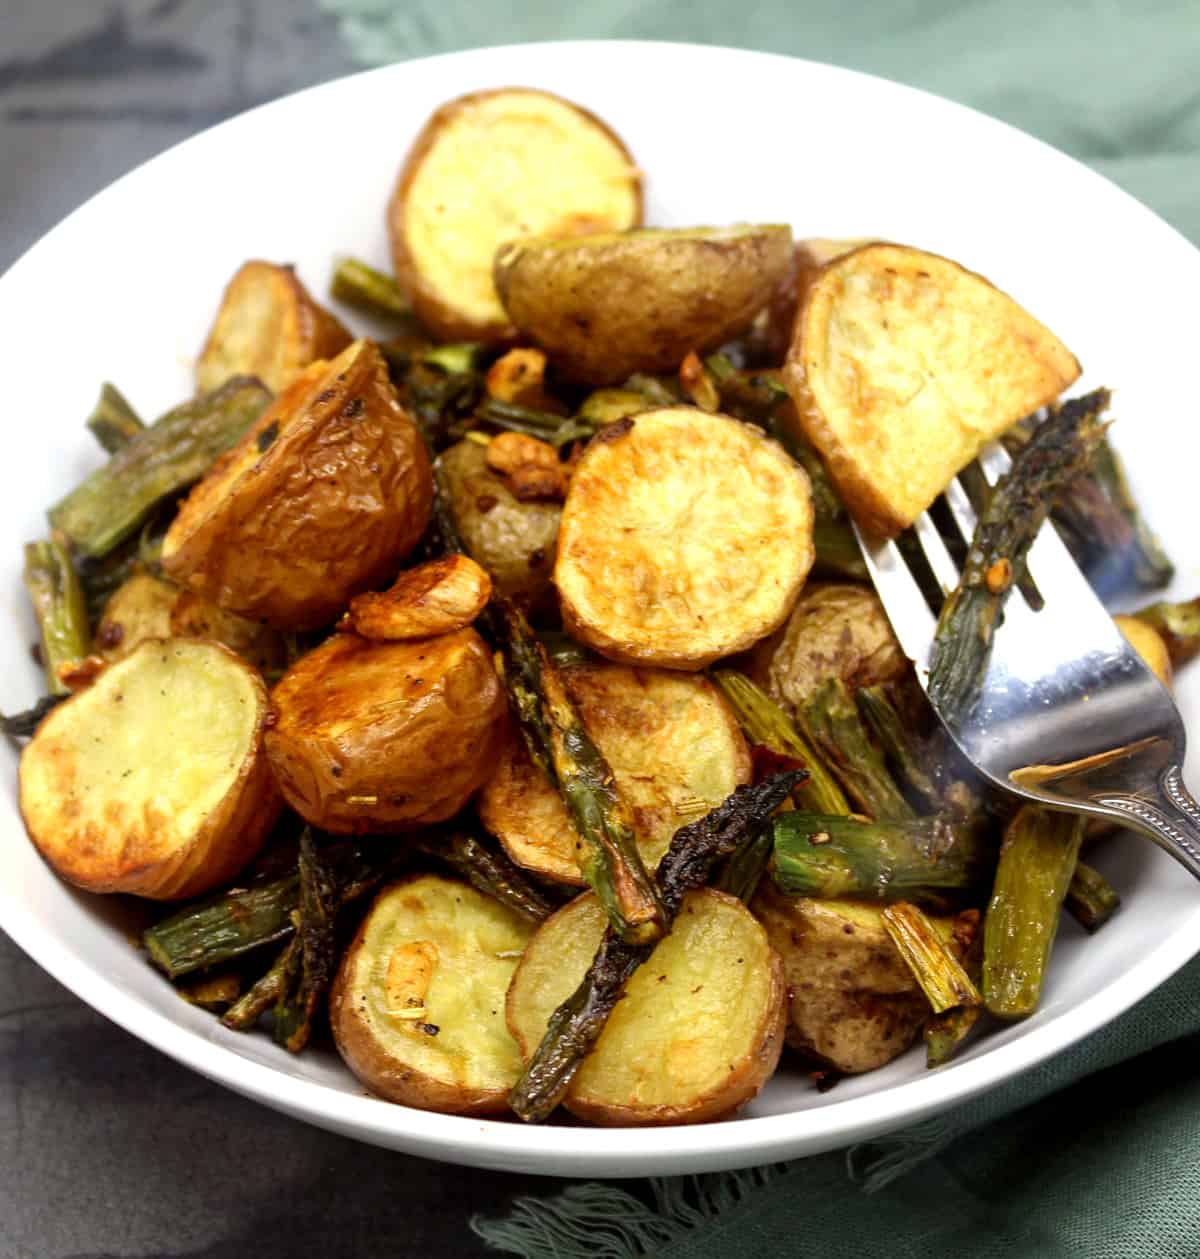 Garlicky roasted asparagus and potatoes in bowl.